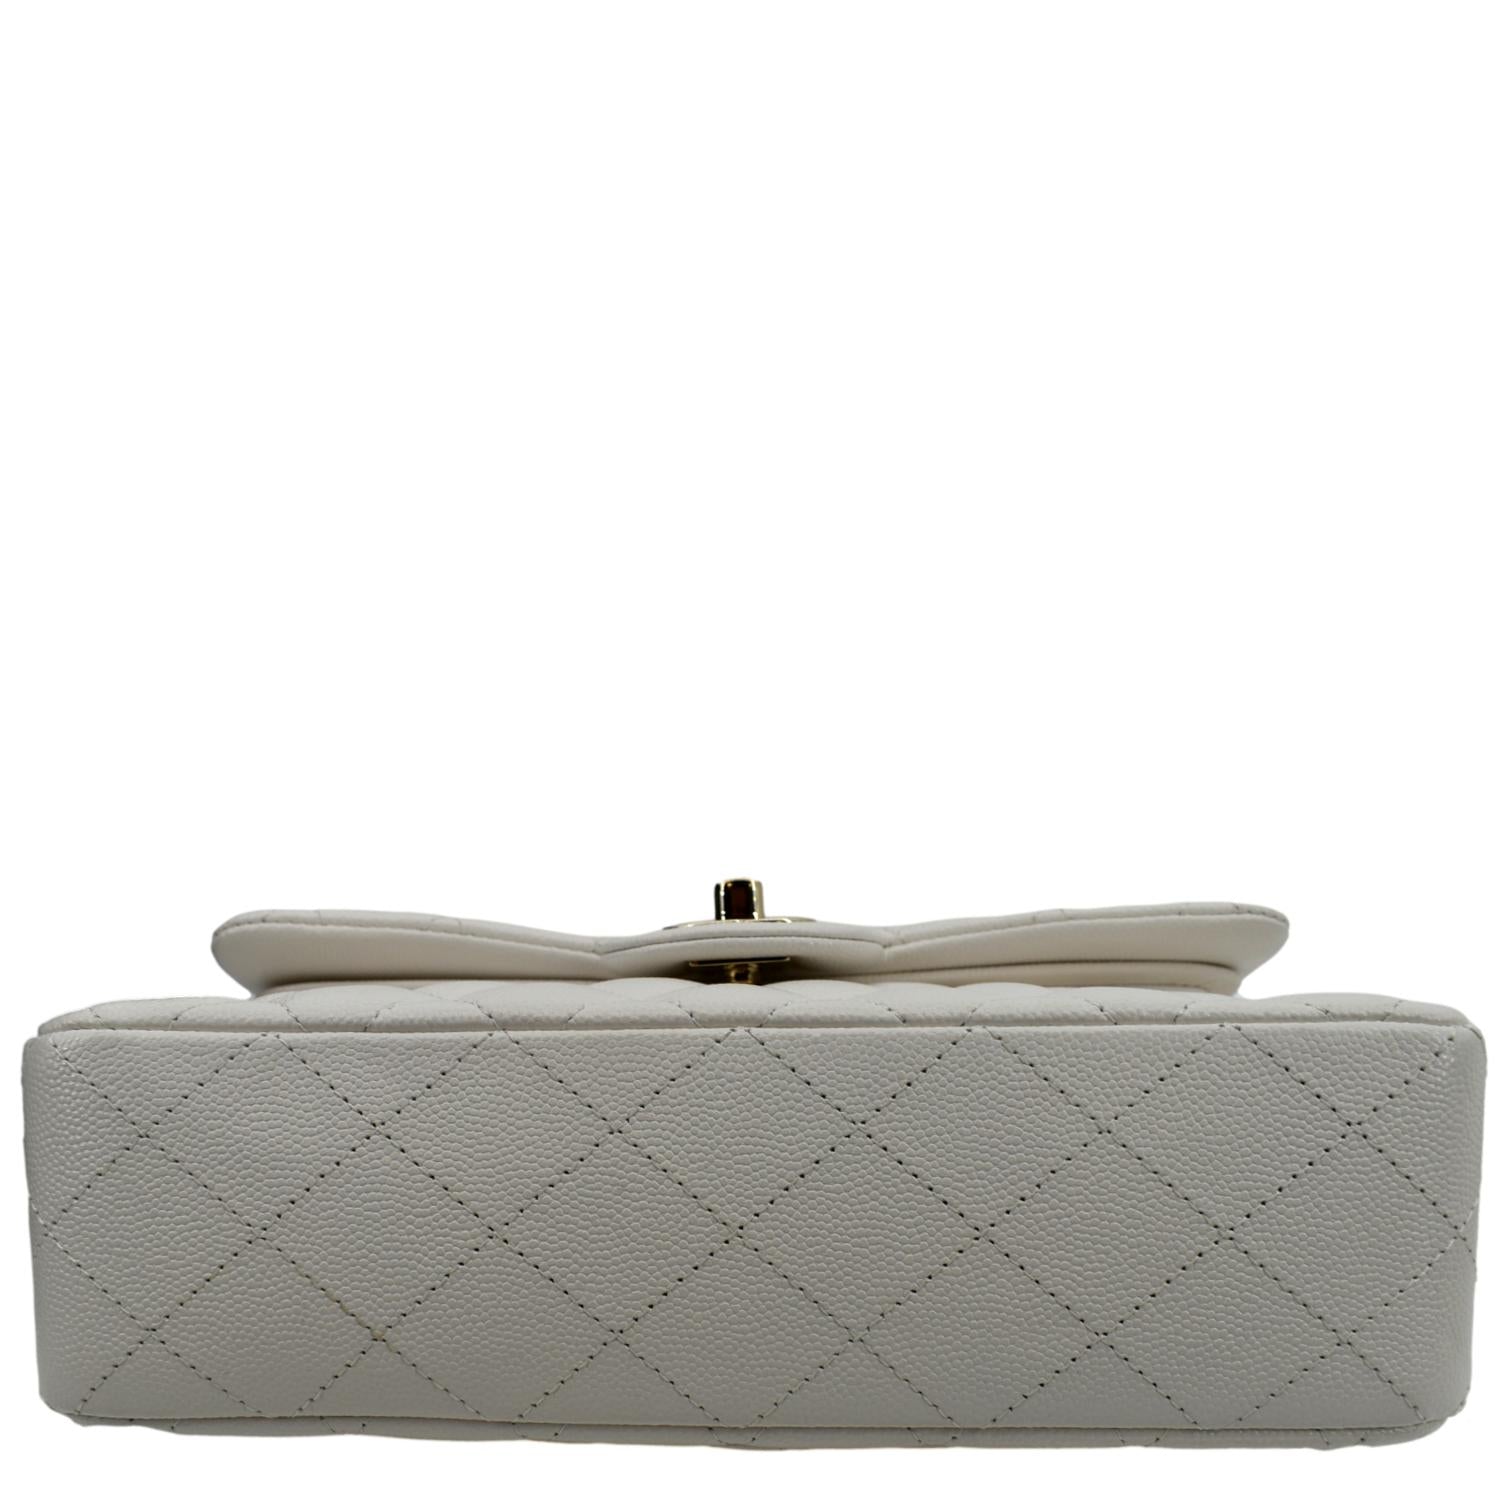 Chanel 23 A Collection White Leather